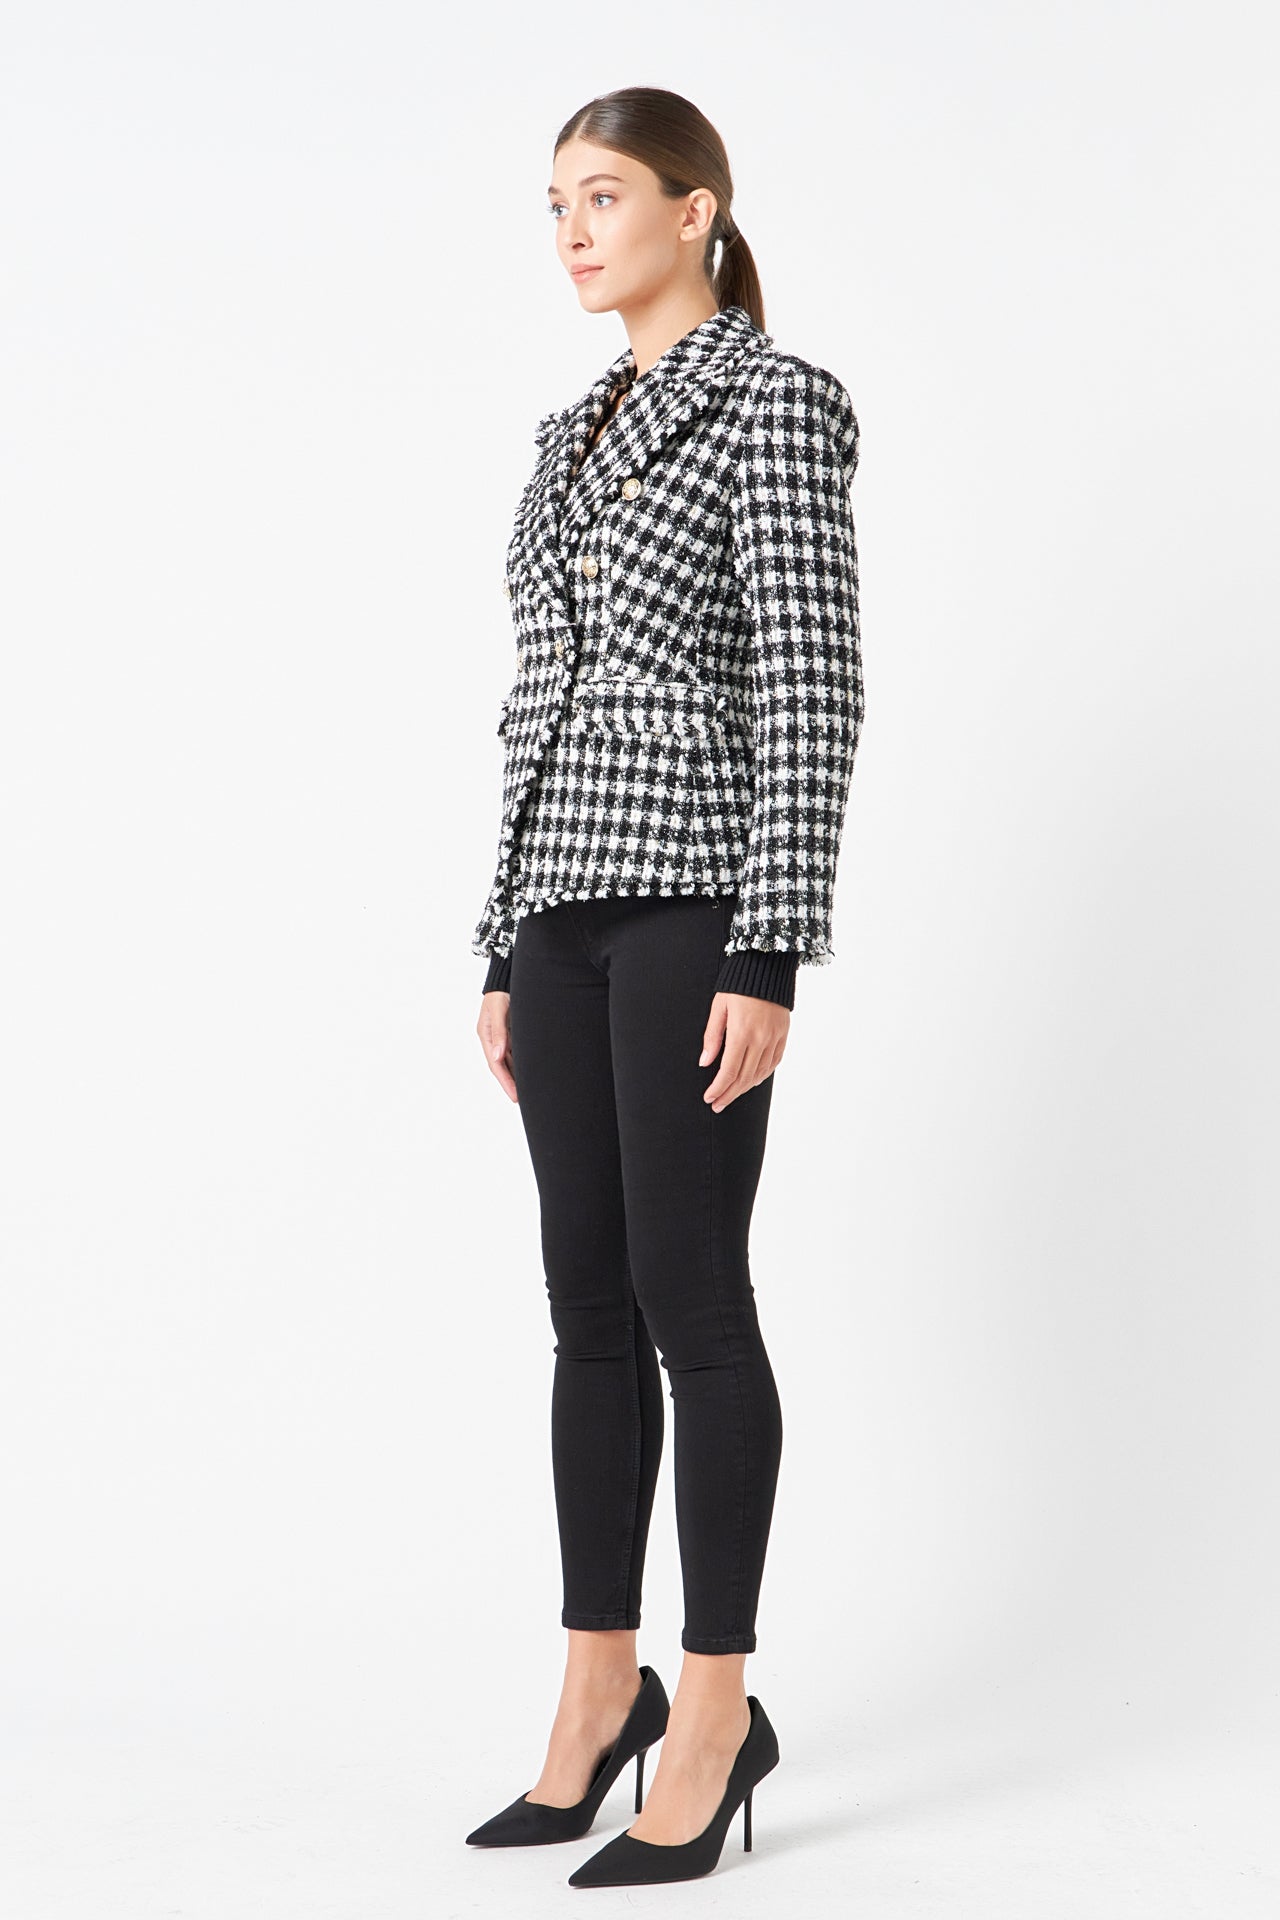 ENDLESS ROSE - Premium Checked Tweed Blazer - BLAZERS available at Objectrare